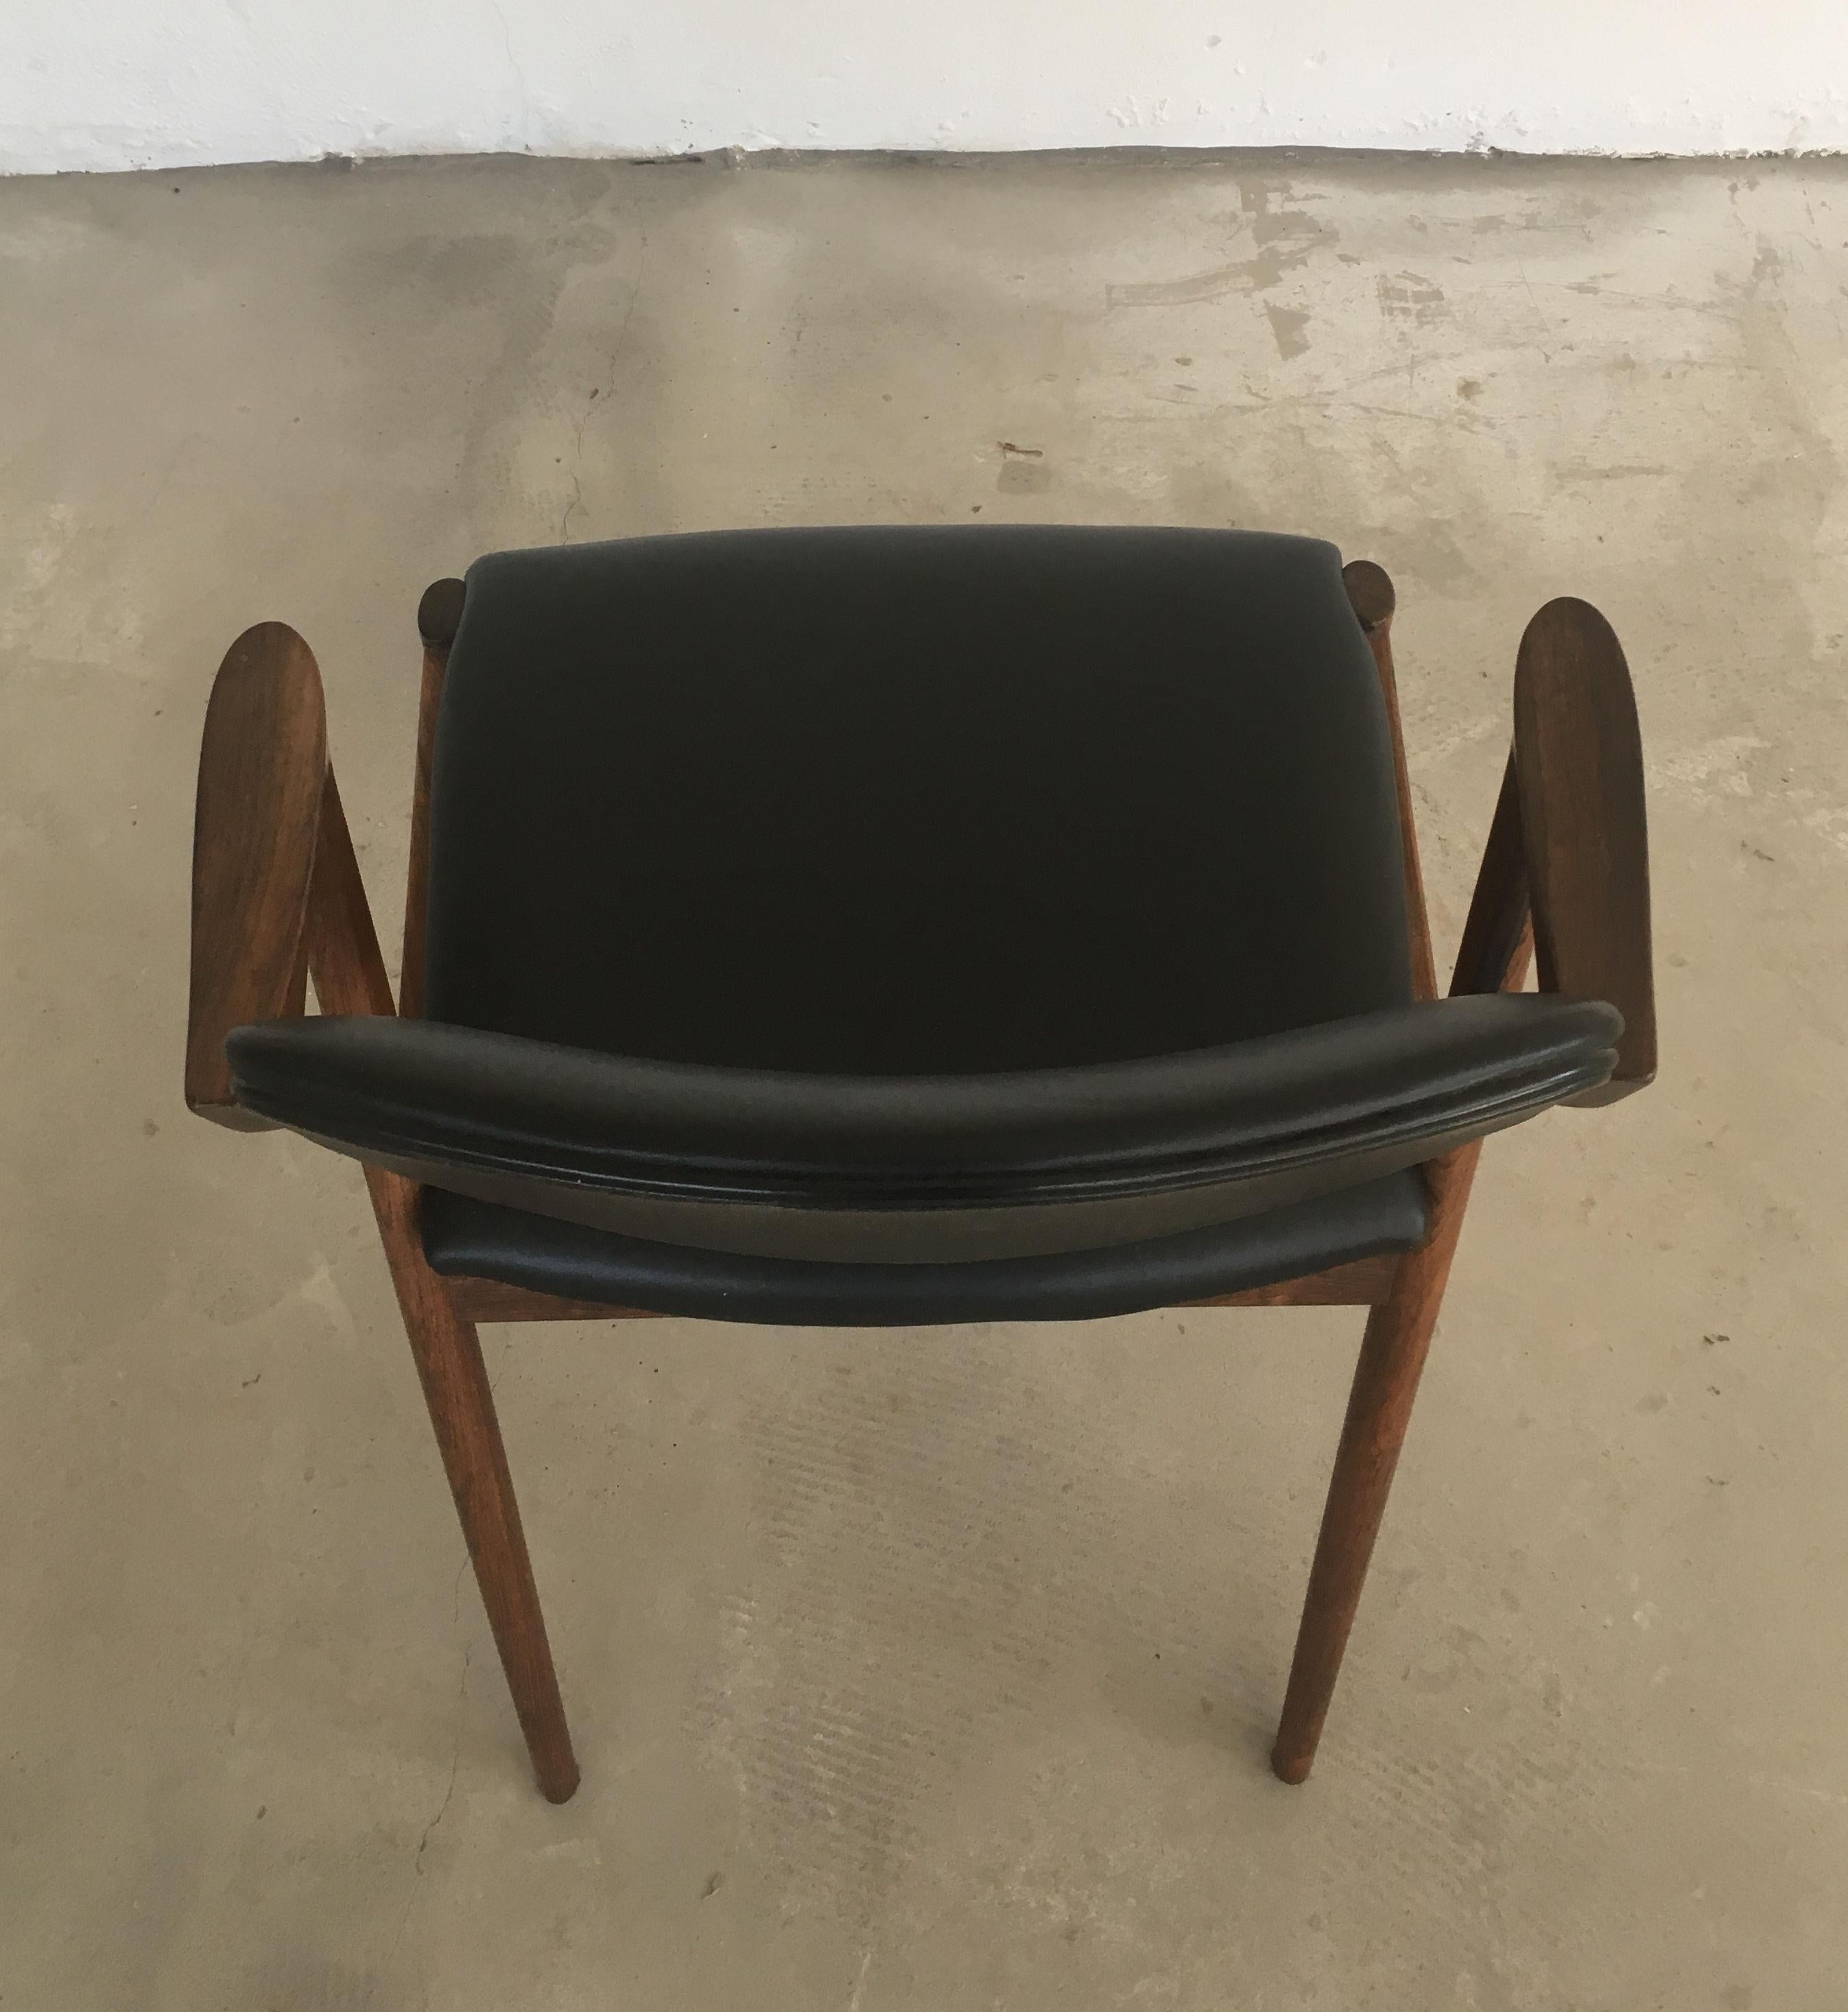 1960s Kai Kristiansen Fully Restored and Reupholstered Rosewood Dining Chairs In Good Condition For Sale In Knebel, DK